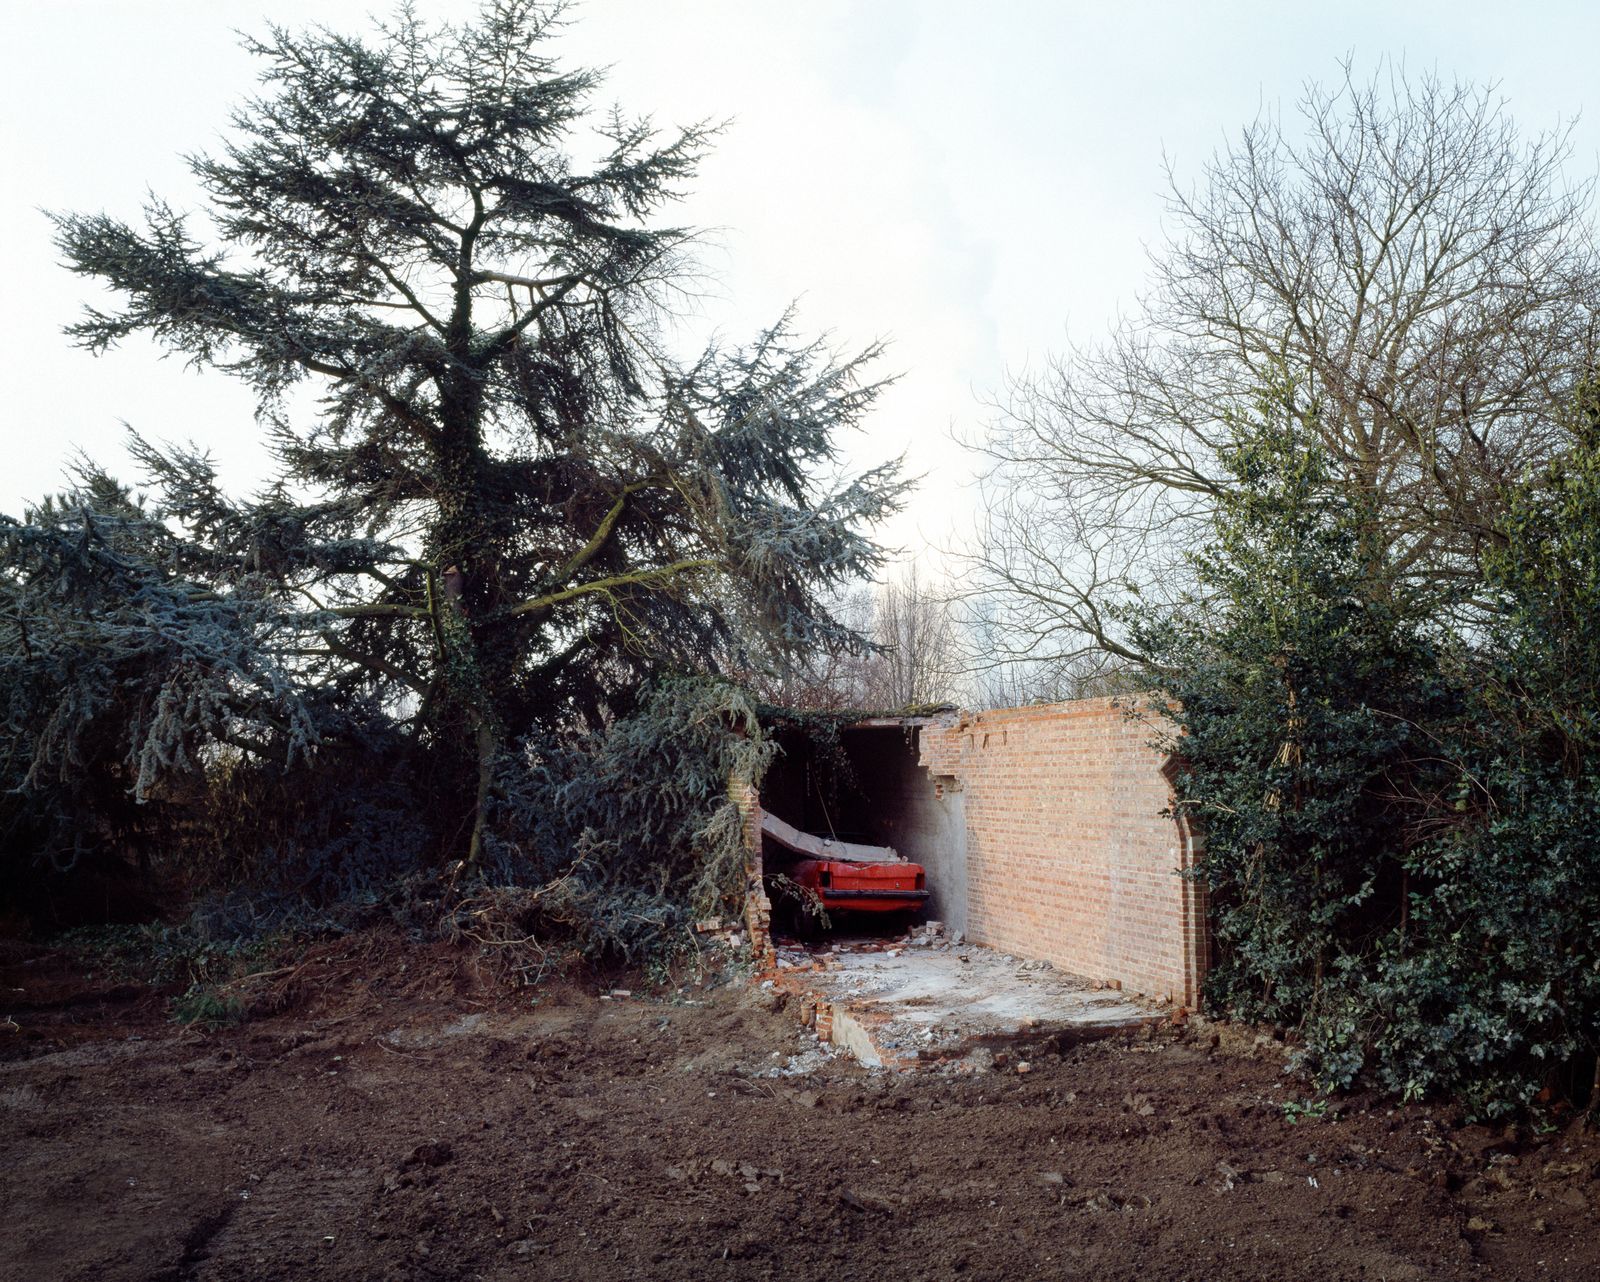 © Isabelle Pateer - Street scene after demolishment of a house in the center of the village of Doel